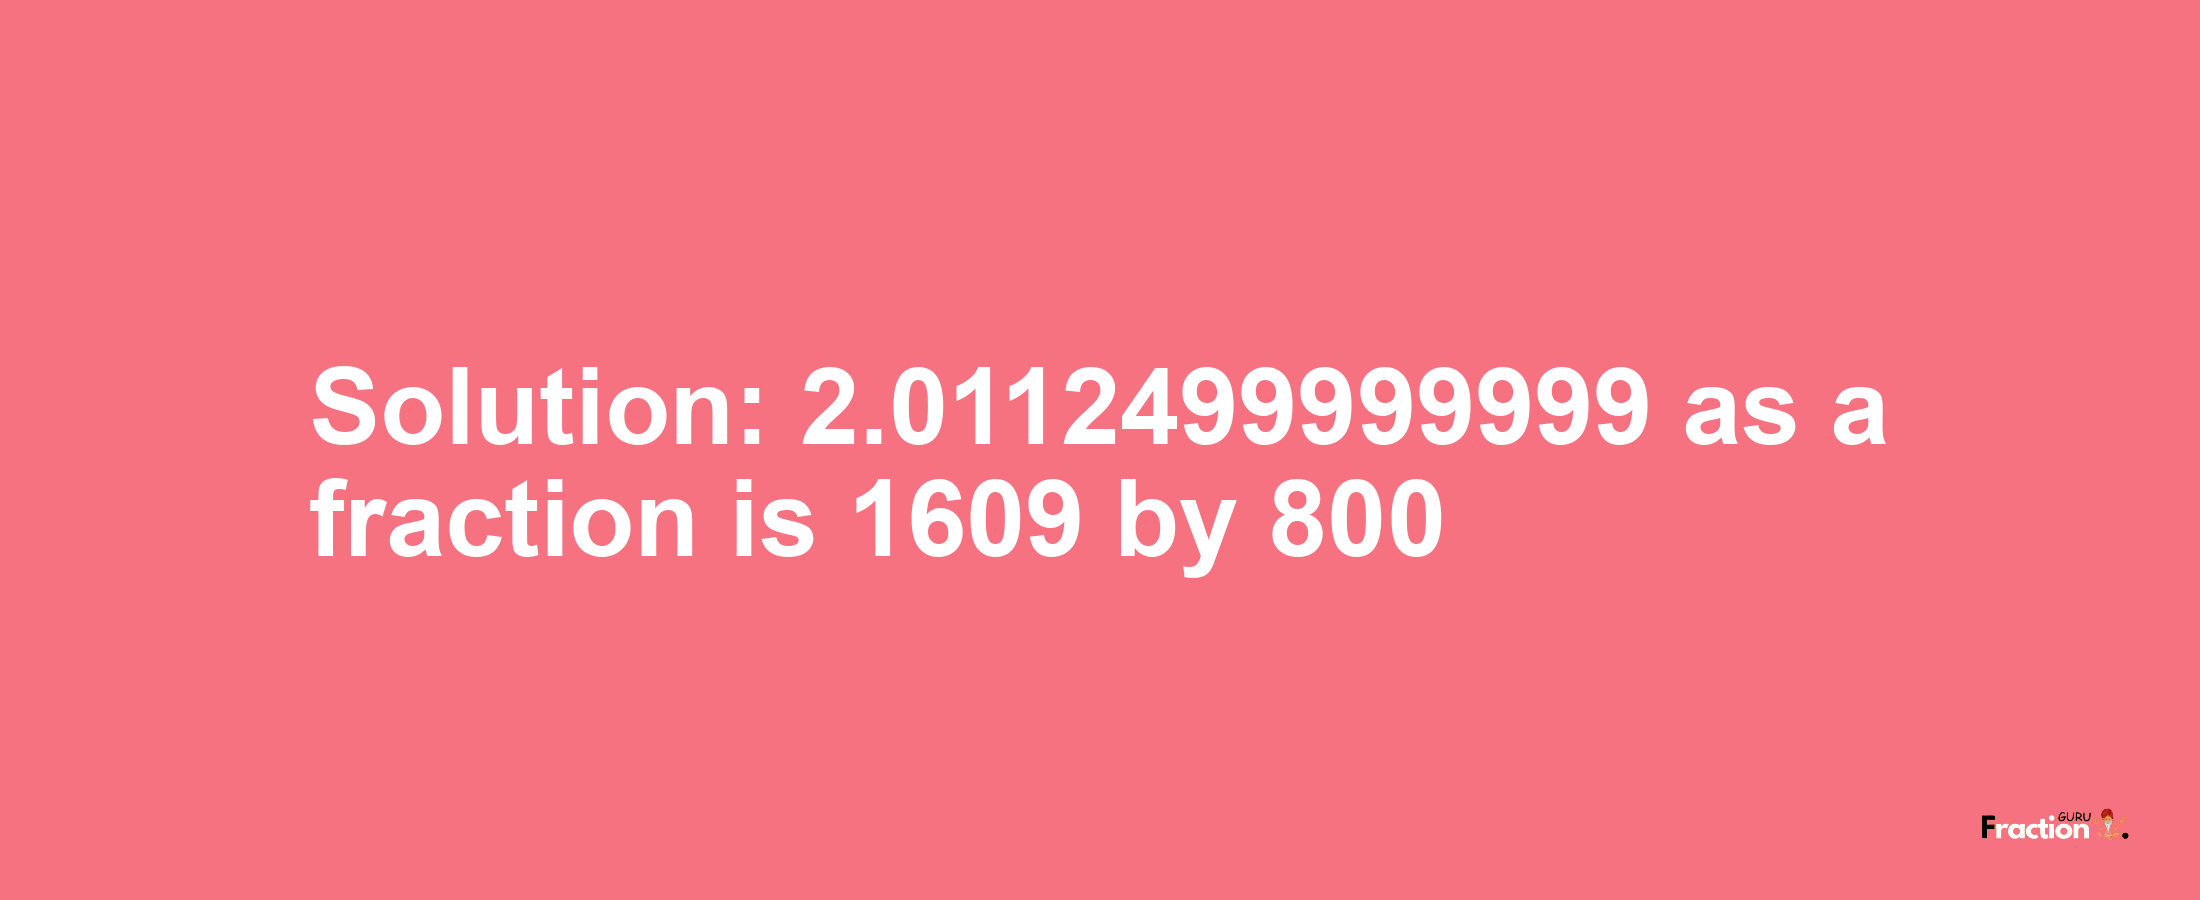 Solution:2.0112499999999 as a fraction is 1609/800